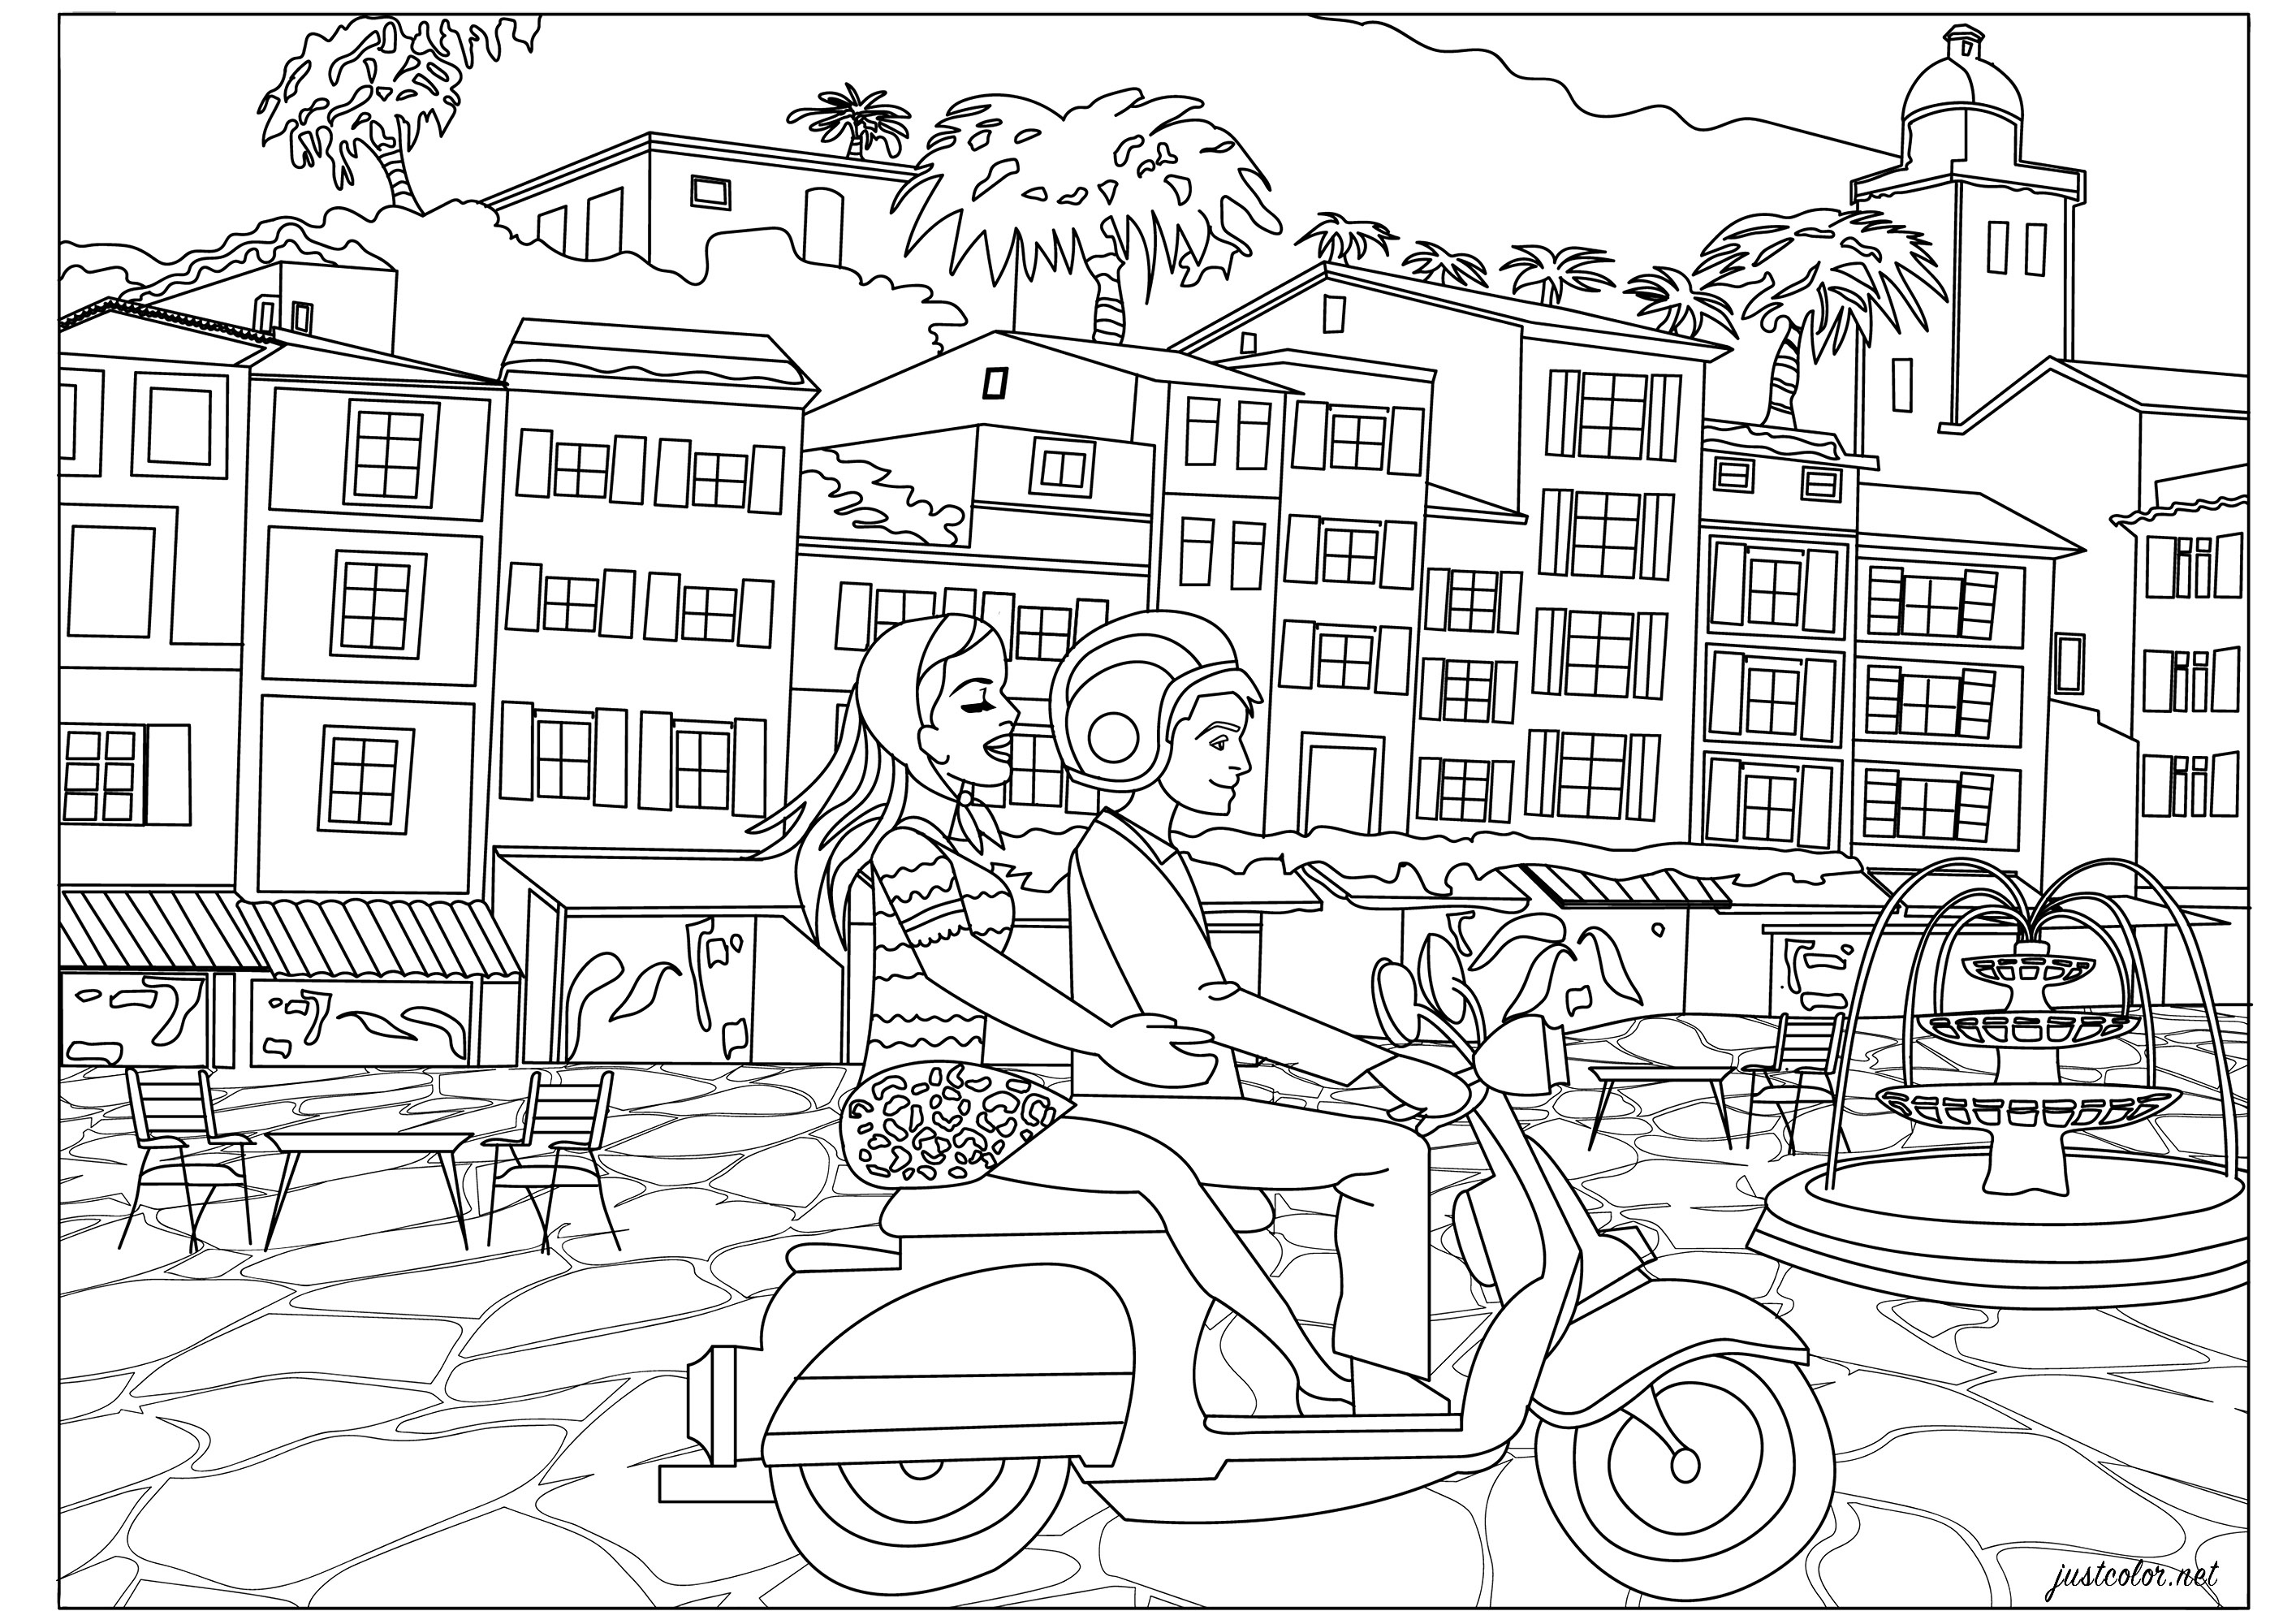 Italian-style vacation for this young couple on their vespa scooter. Stroll along the coast through pretty villages... Color these typical Italian houses, the fountain in the square, the scooter and recreate the 'dolce vita' atmosphere!, Artist : Morgan